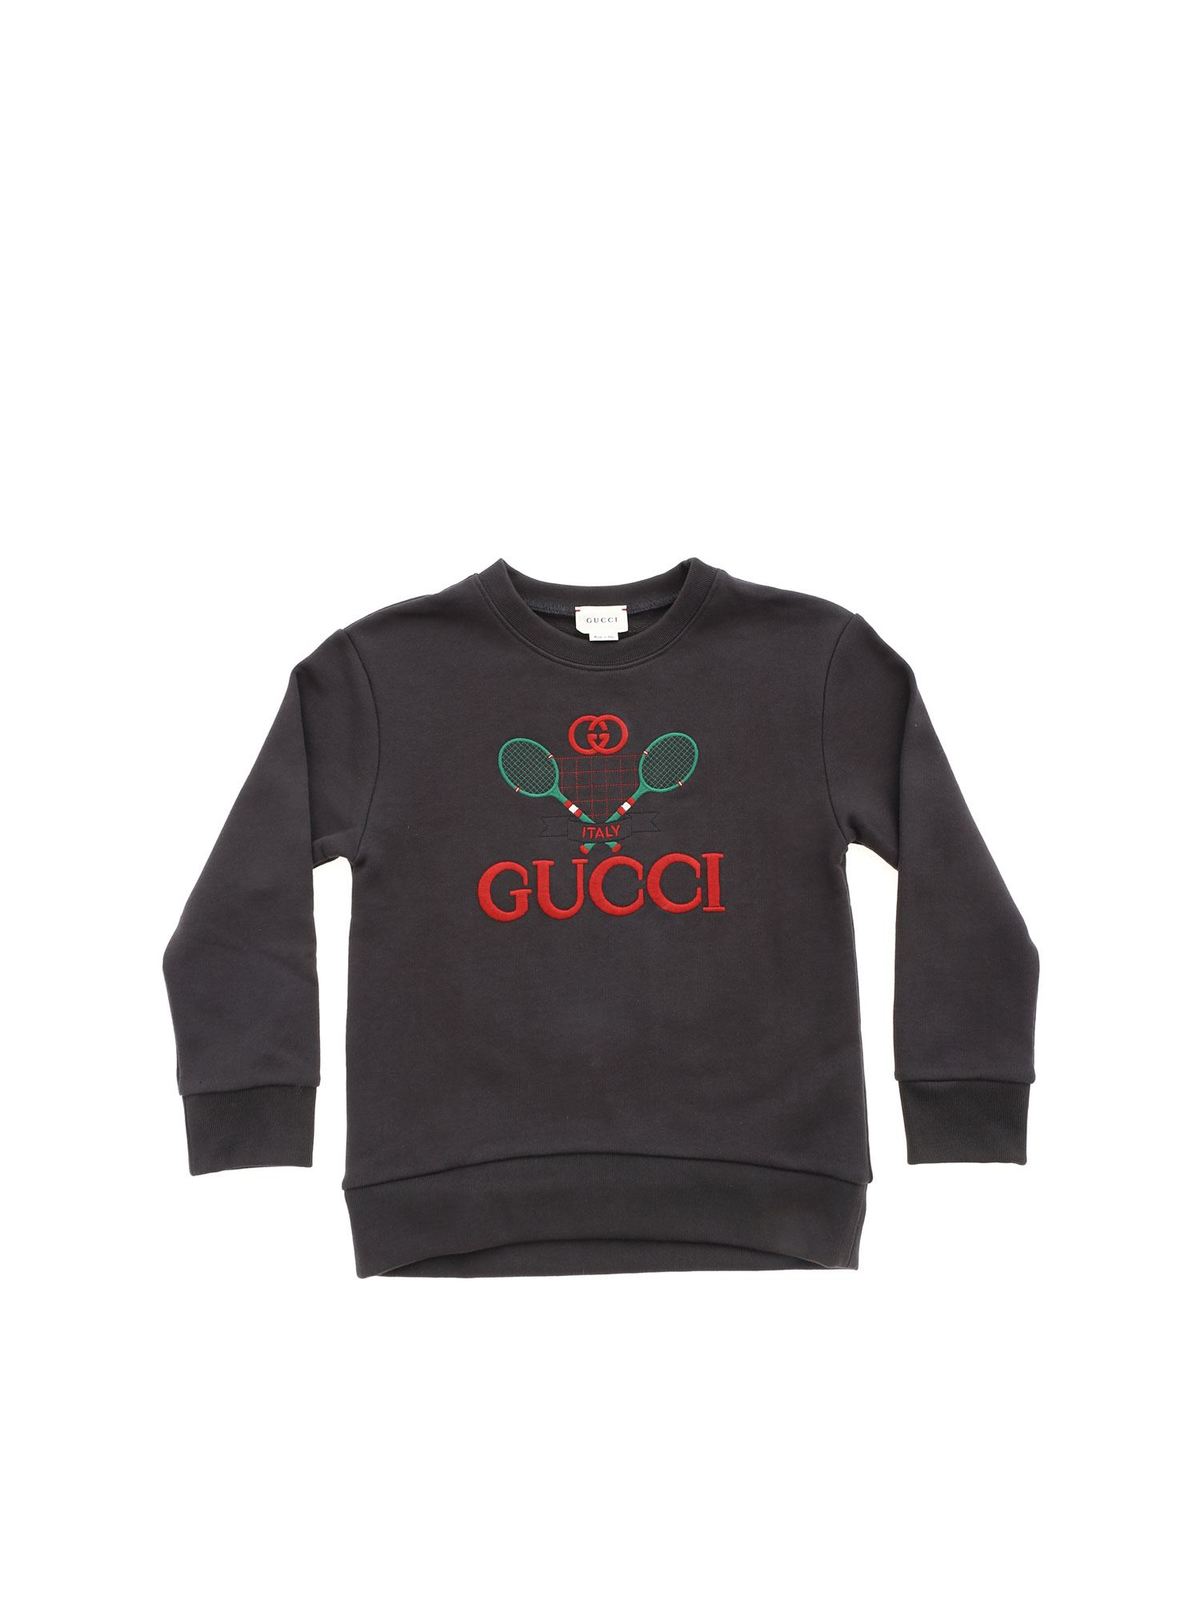 gucci italy tennis sweater